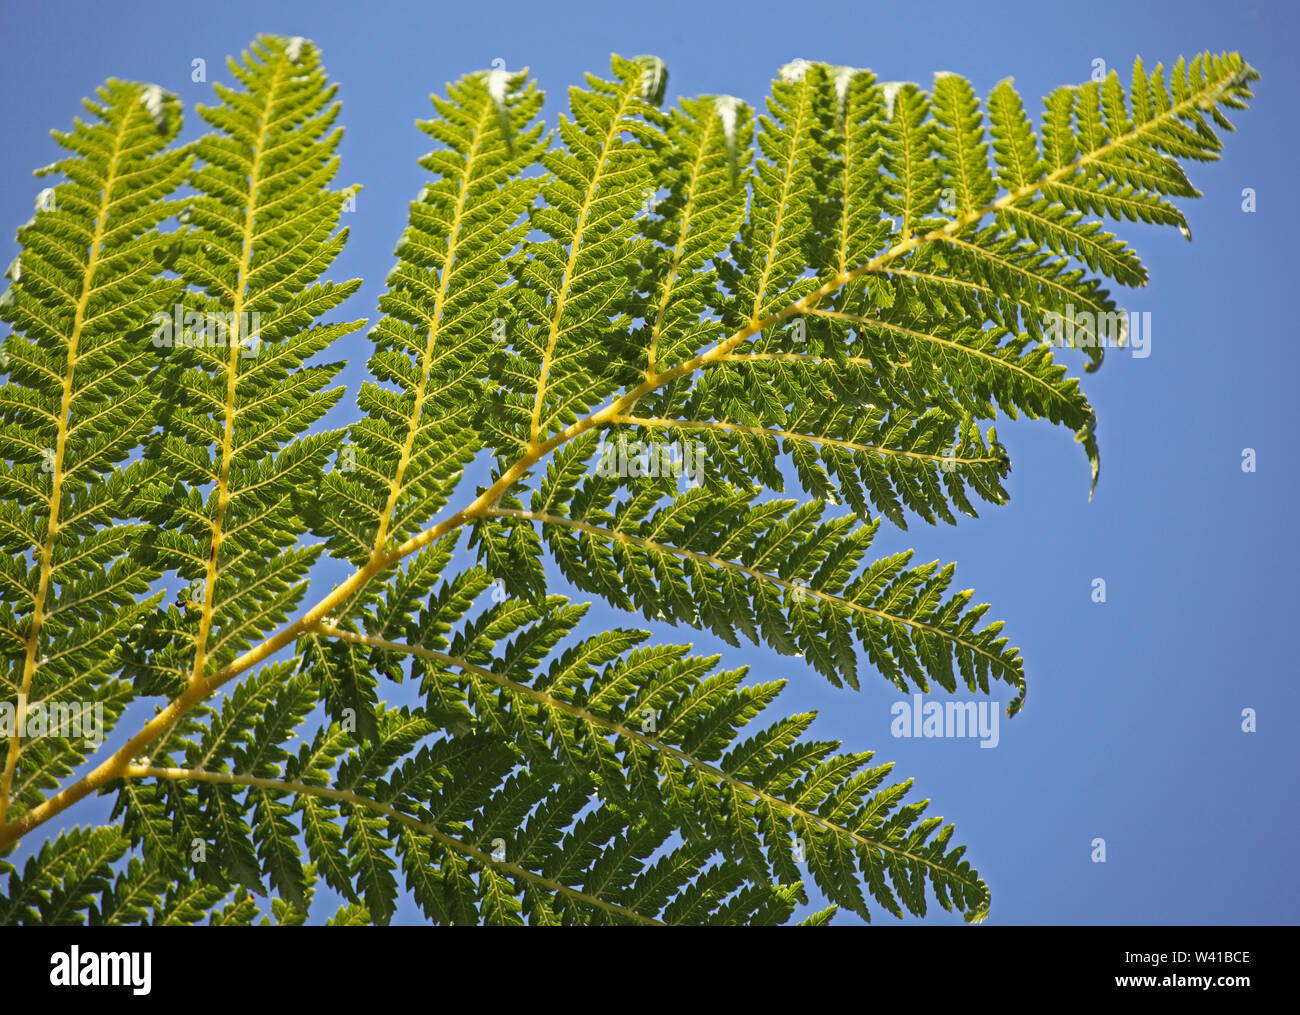 Close-up detail of fronds on a tree fern Dickinsonia Antarctica in a London garden against a blue sky. Light shines through showing leaf structure. Stock Photo